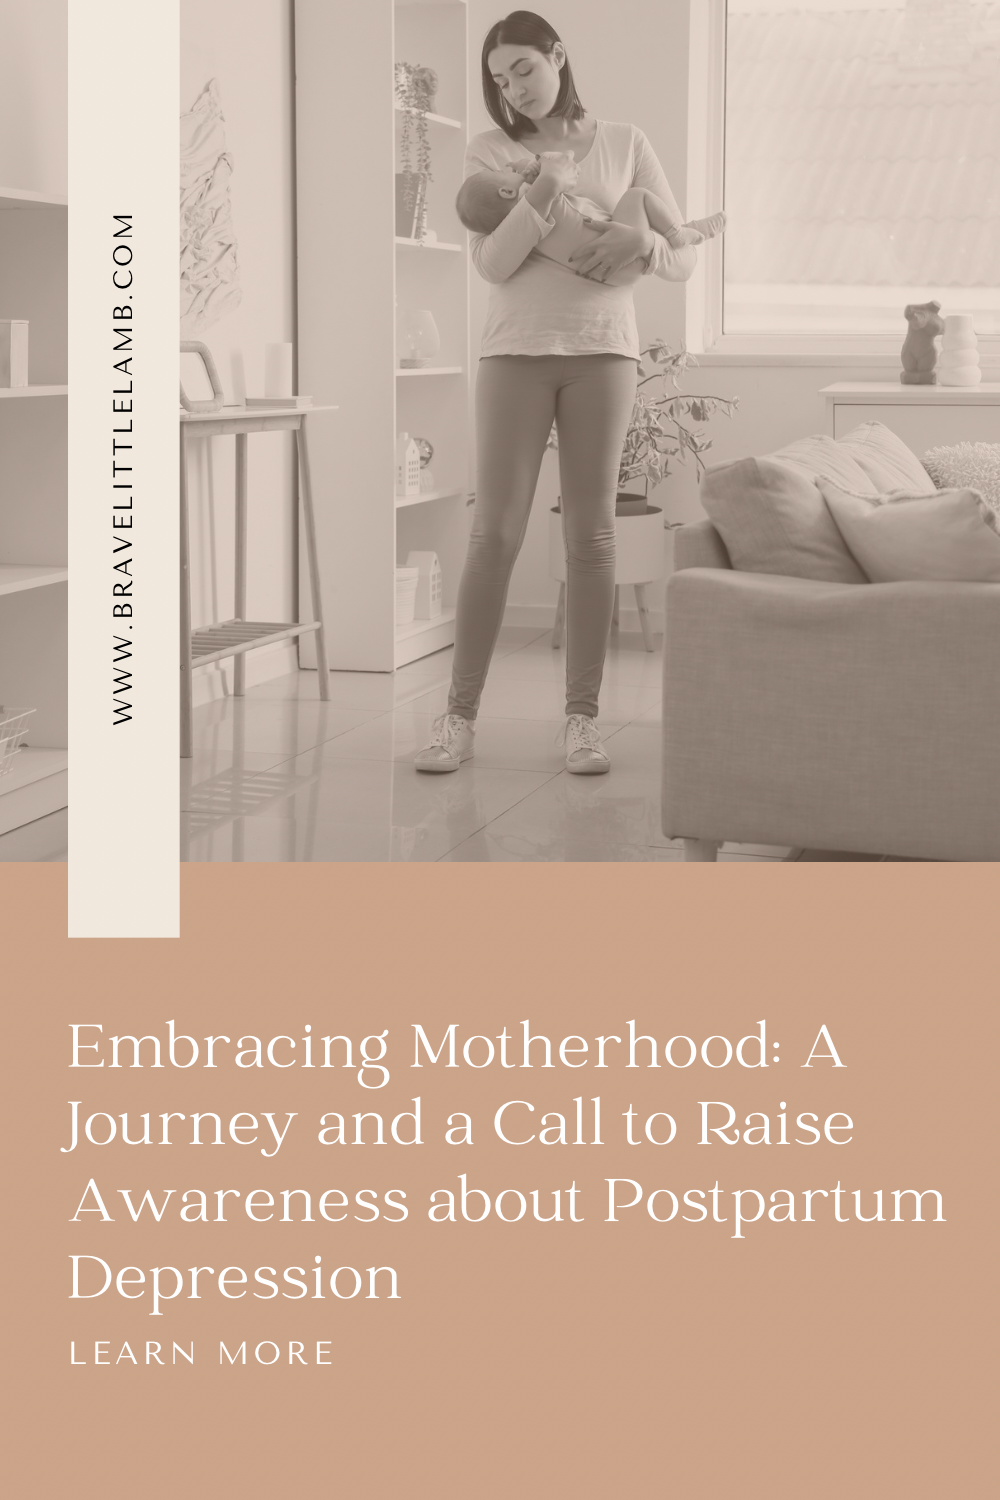 Embracing Motherhood: A Journey and a Call to Raise Awareness about Postpartum Depression